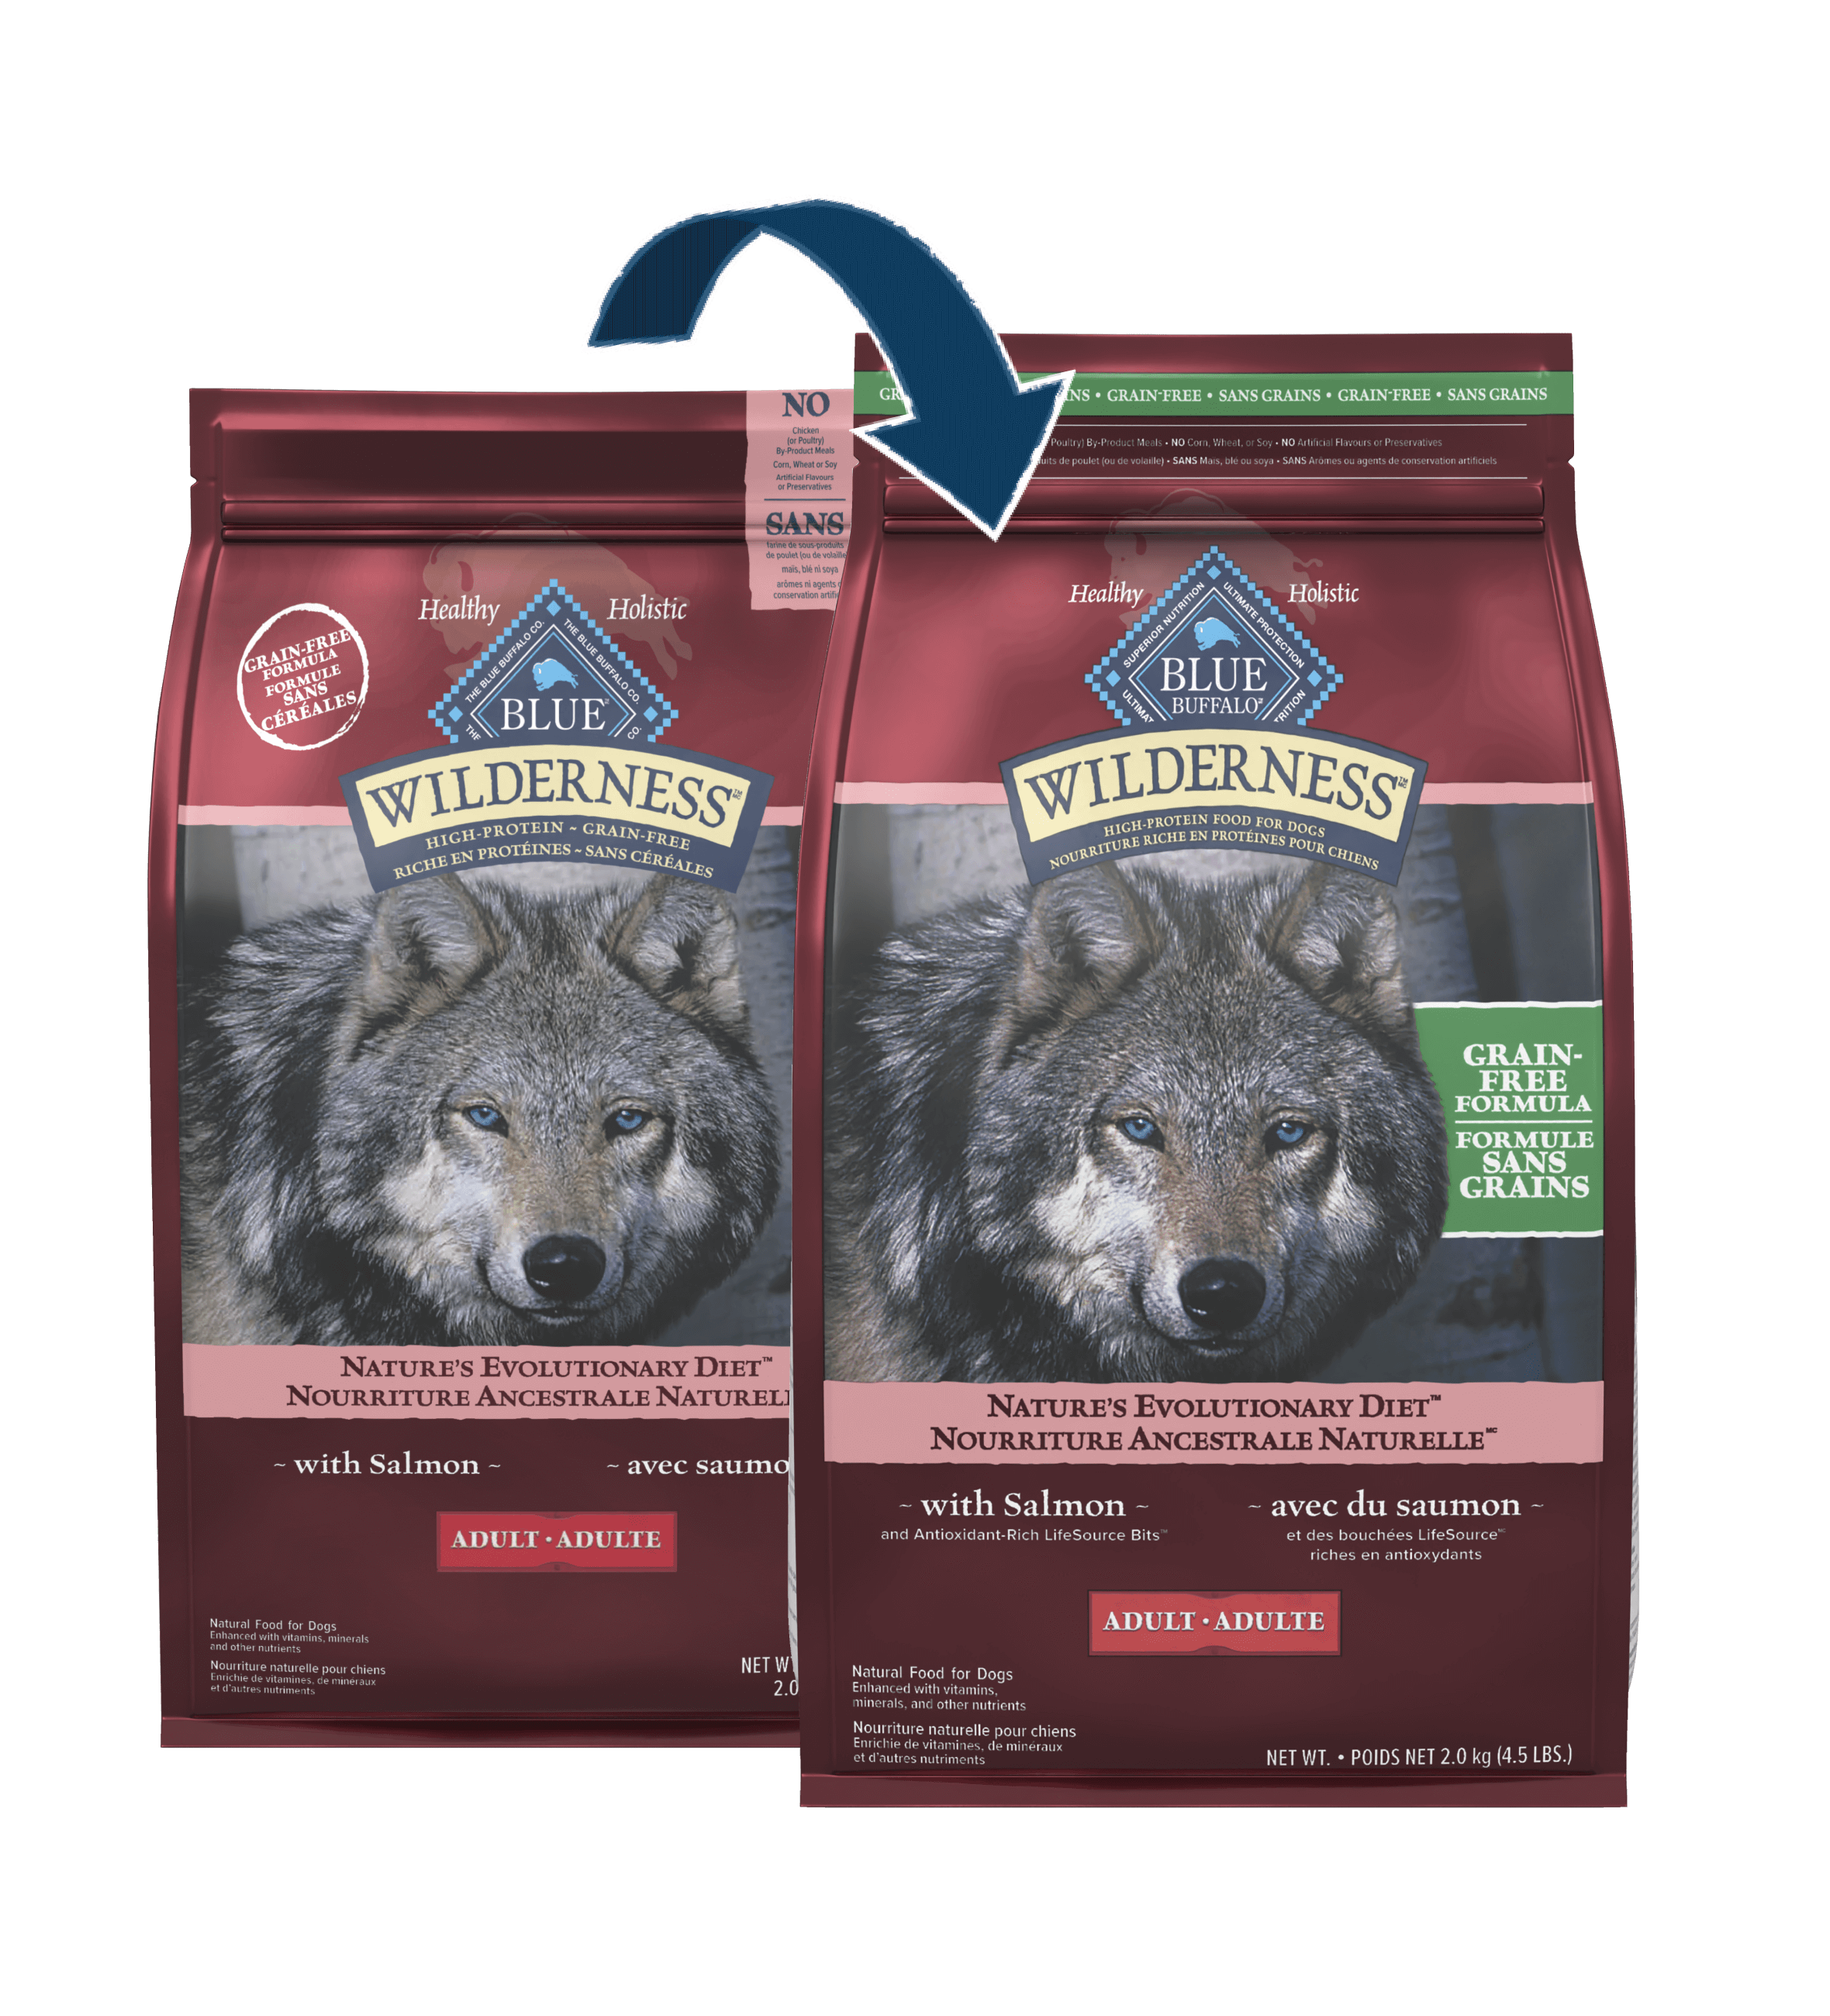 Image of two bags of Blue Buffalo Wilderness high-protein, grain-free dog food with an image of a wolf on the front and text highlighting the salmon ingredient and the packaging transition.